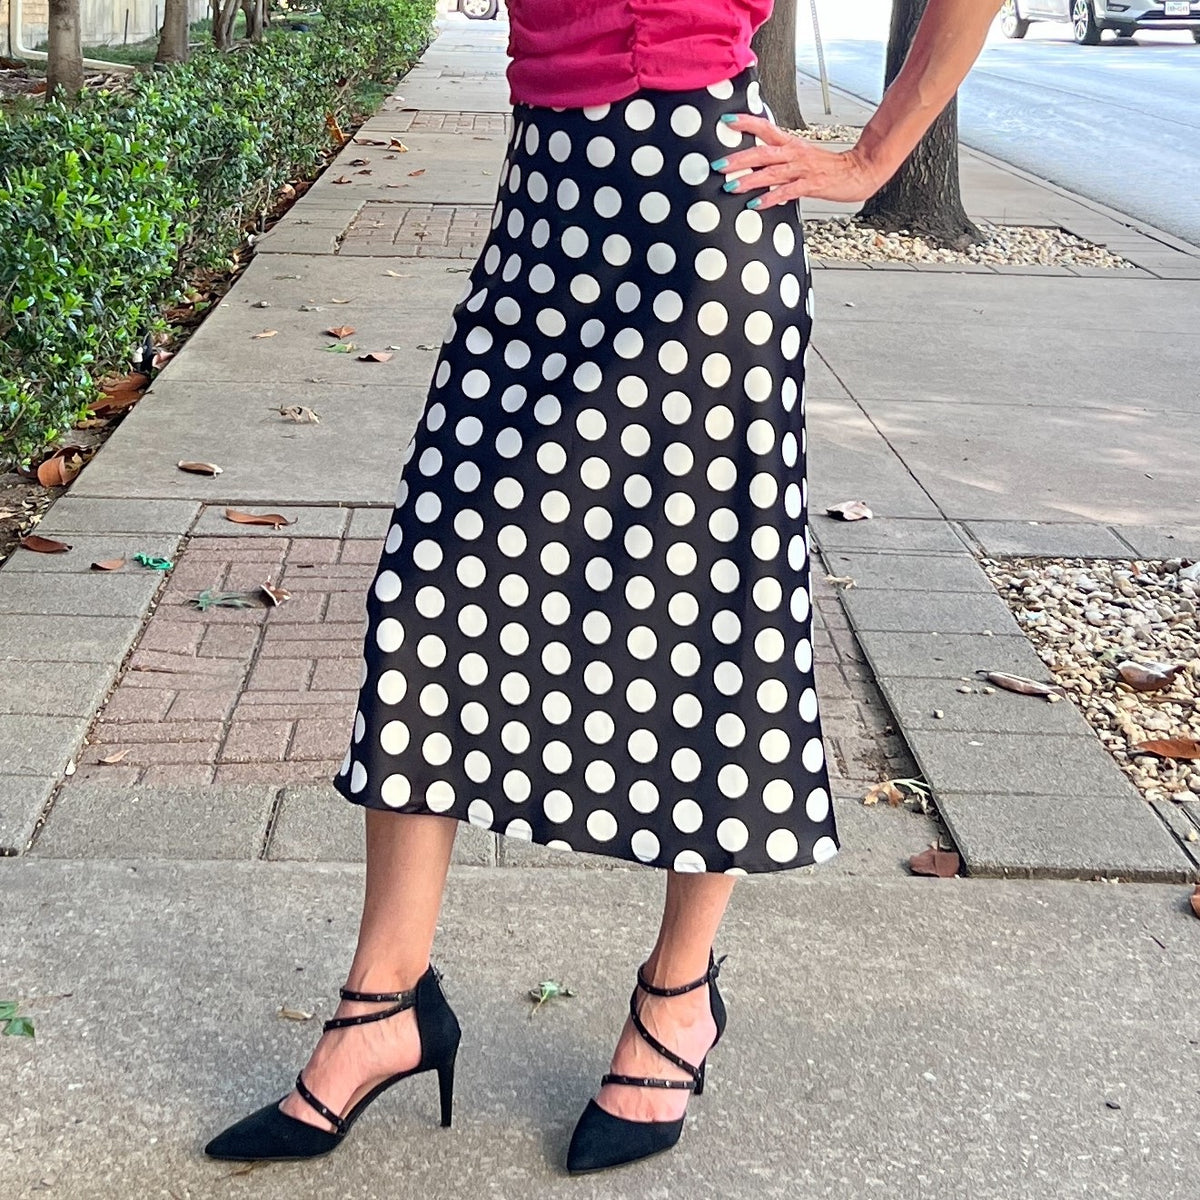 Midi length black satin skirt with medium white polka dots. Pencil skirt shape at hips with a slight a-line flare at the knees to calves. Model is wearing the black satin skirt with black heels and pink crop top and is standing on a sidewalk.